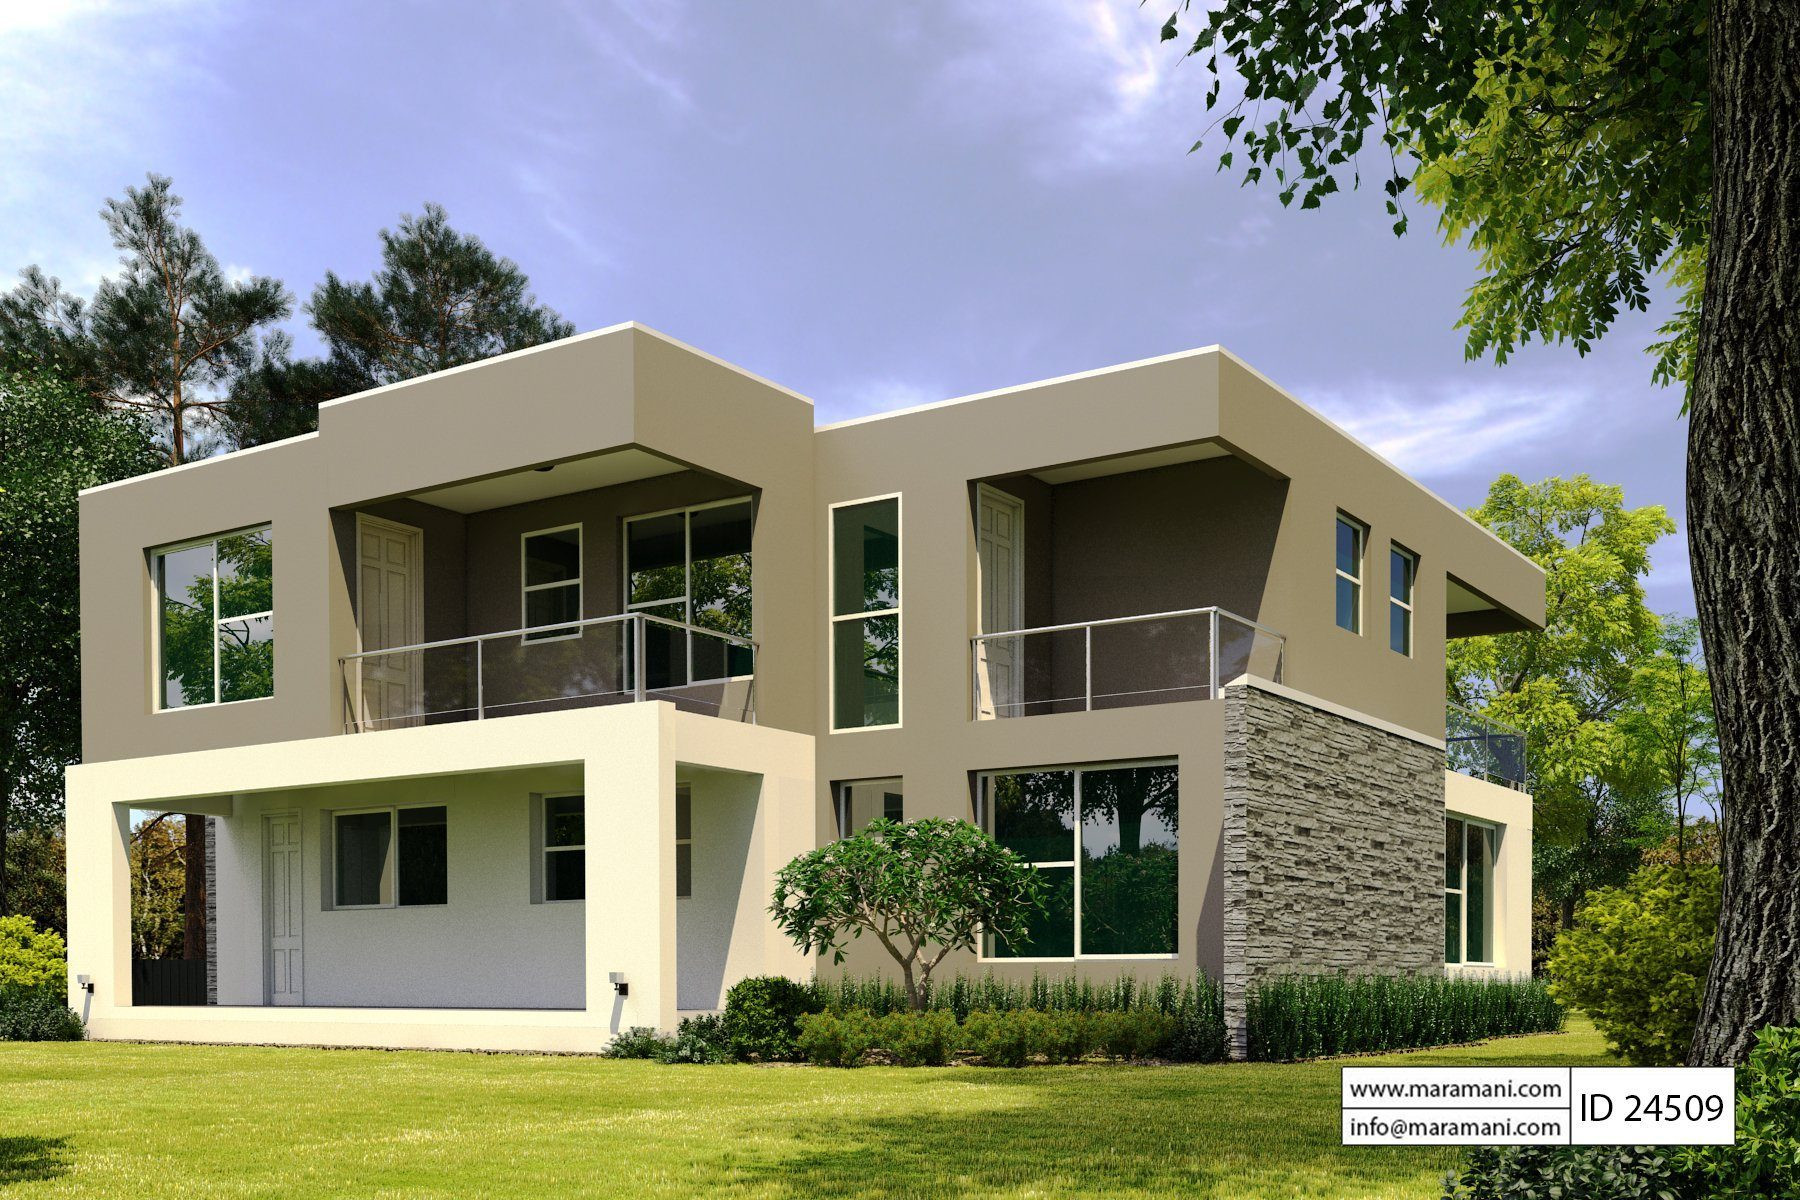 4 Bedroom Modern House Plans
 4 bedroom modern house plan ID House Plans by